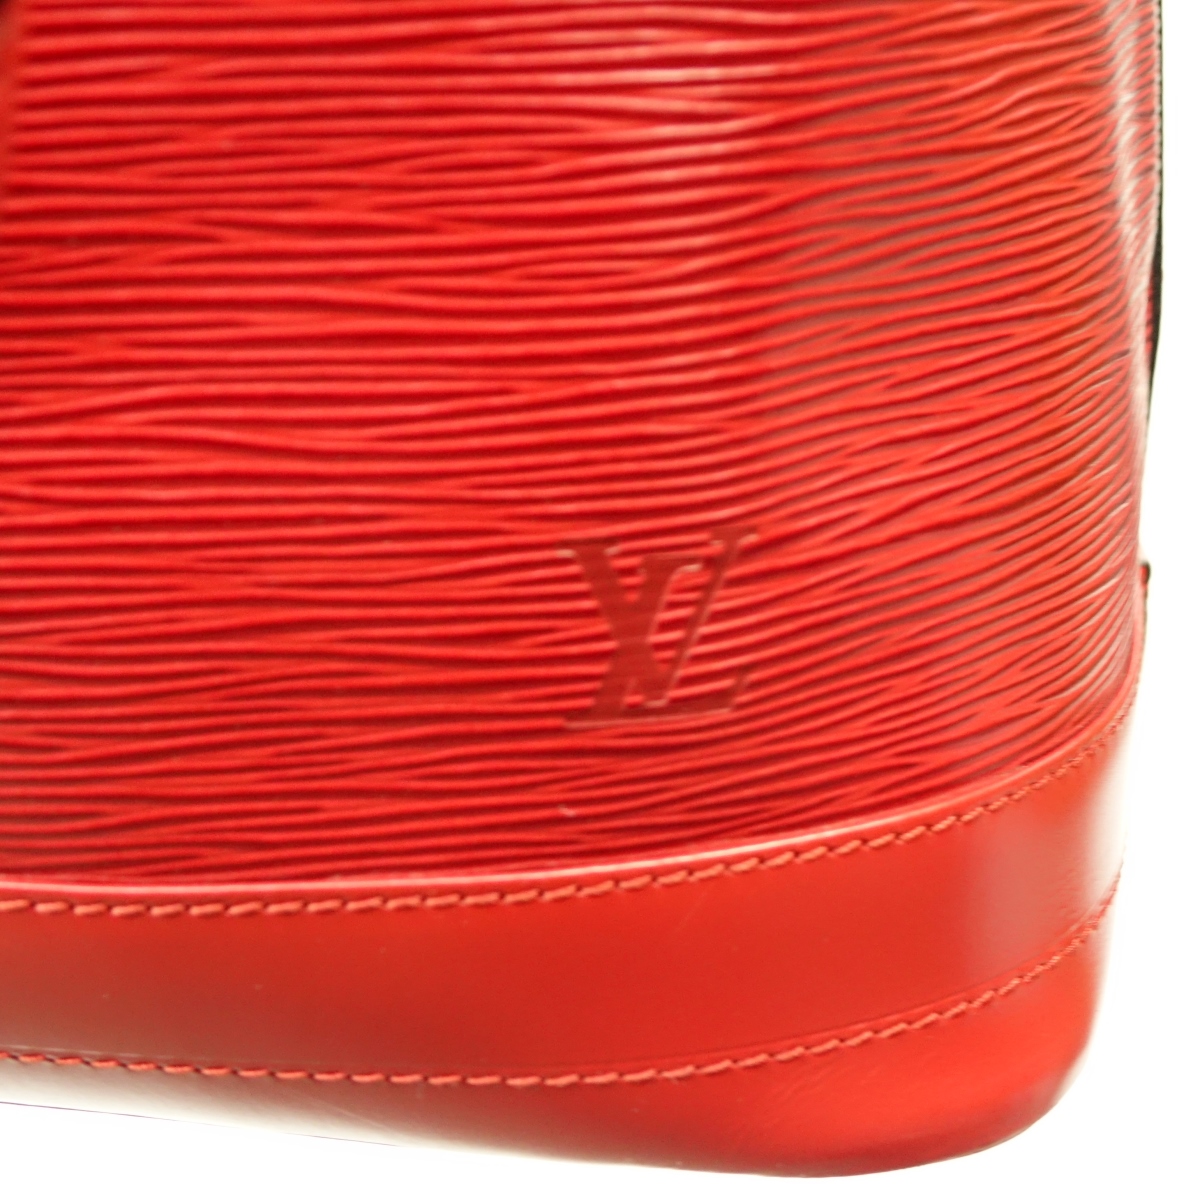 Louis Vuitton Red Epi Leather Noe GM Bag